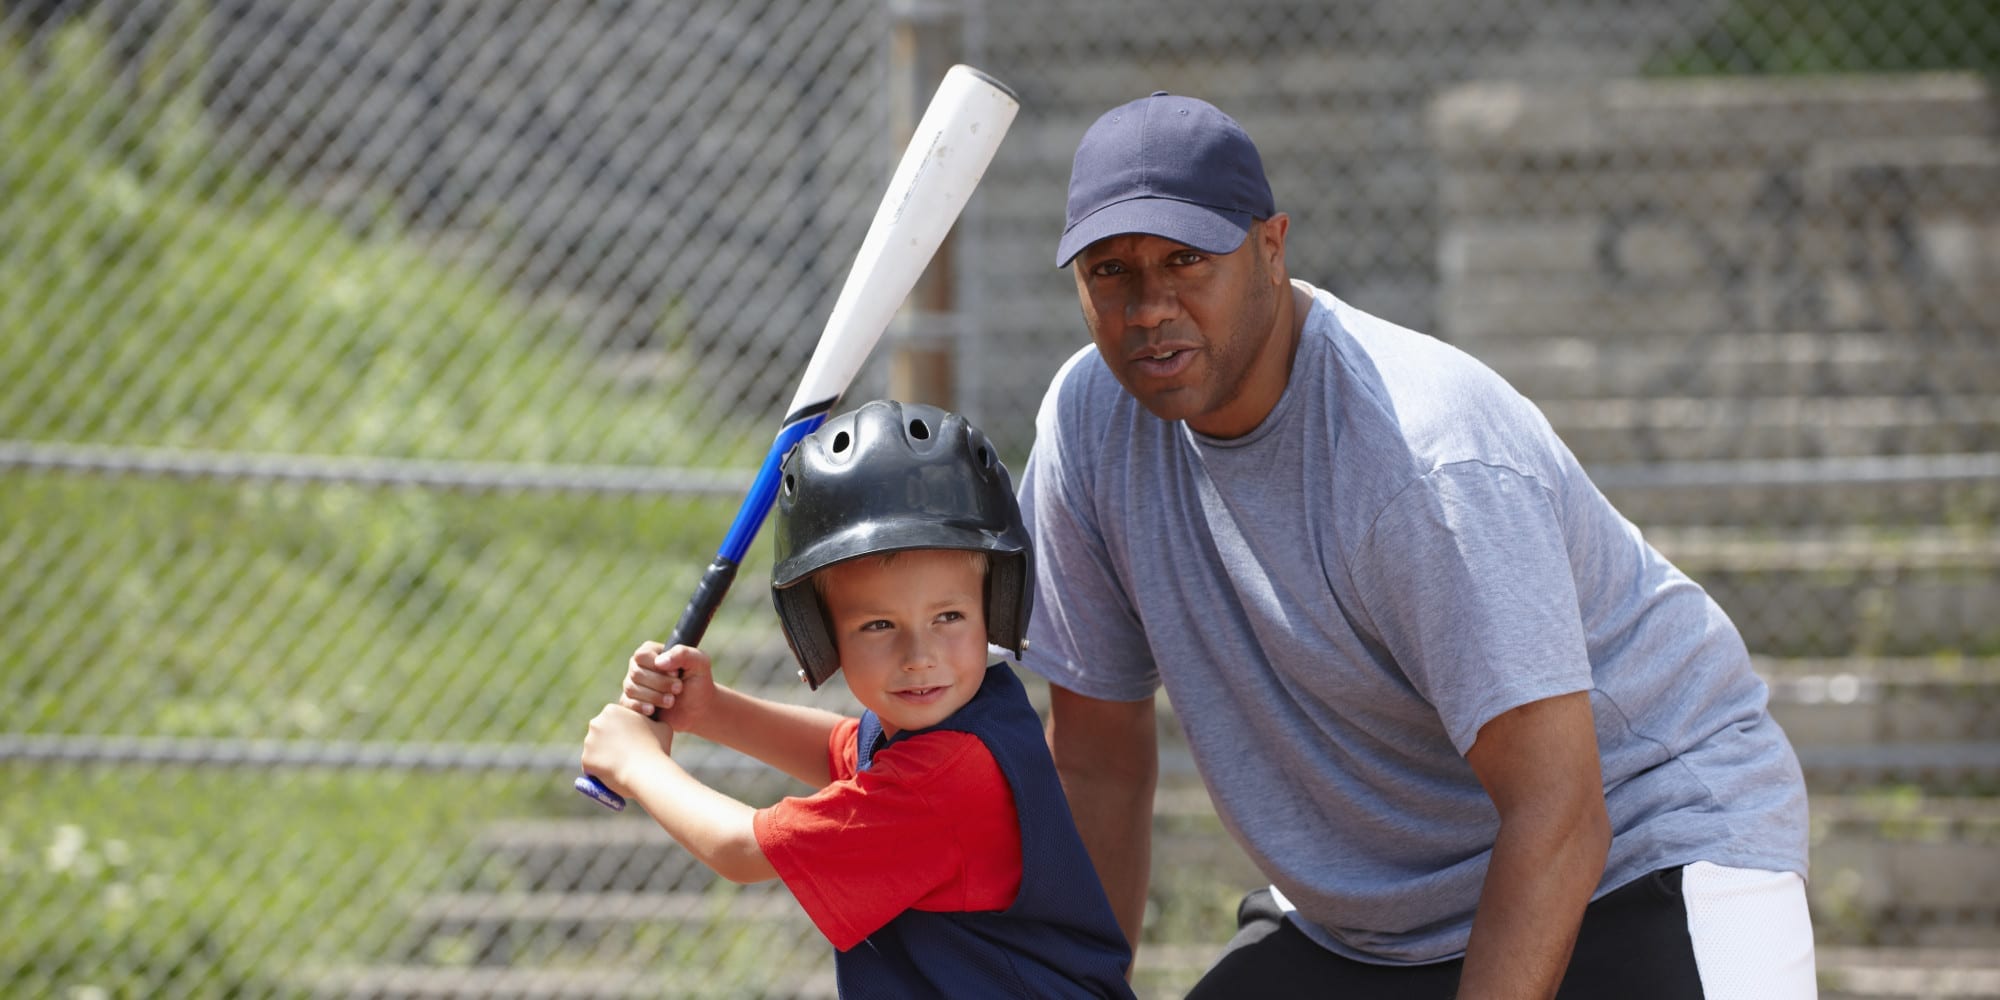 Local Dads Say “No” To Father’s Day Gifts, Insist Winning Tee-ball Team Only Option